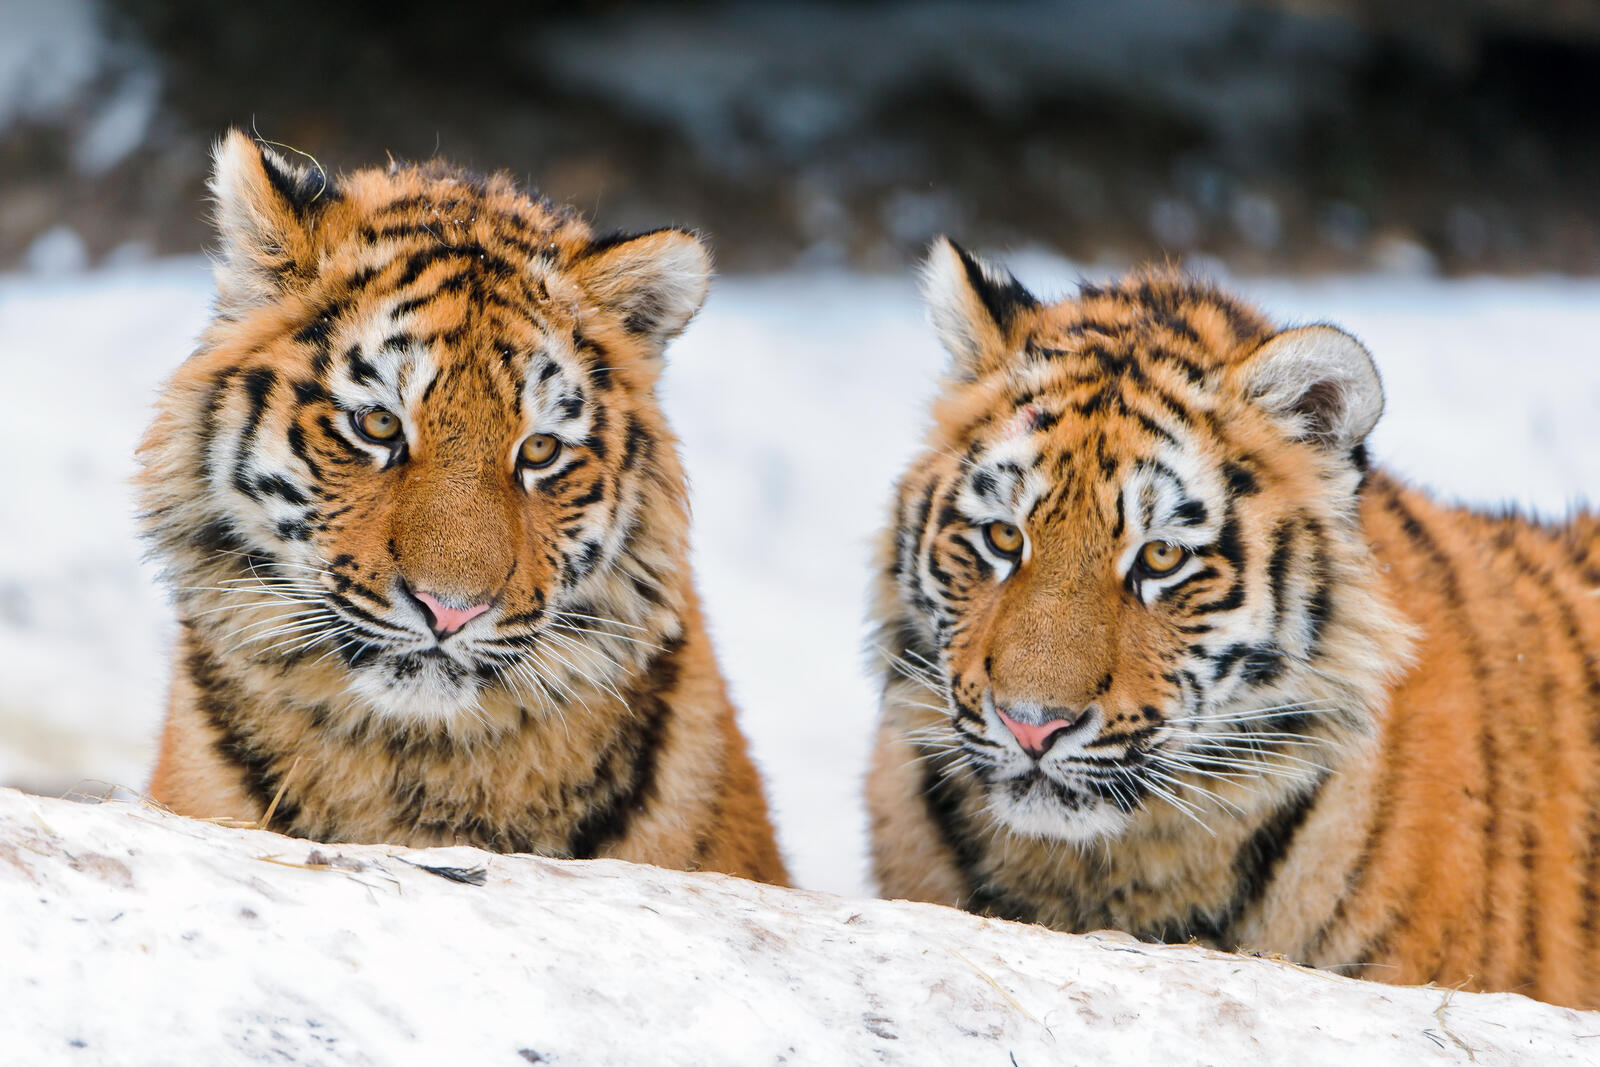 Wallpapers nature tiger tigers winter on the desktop